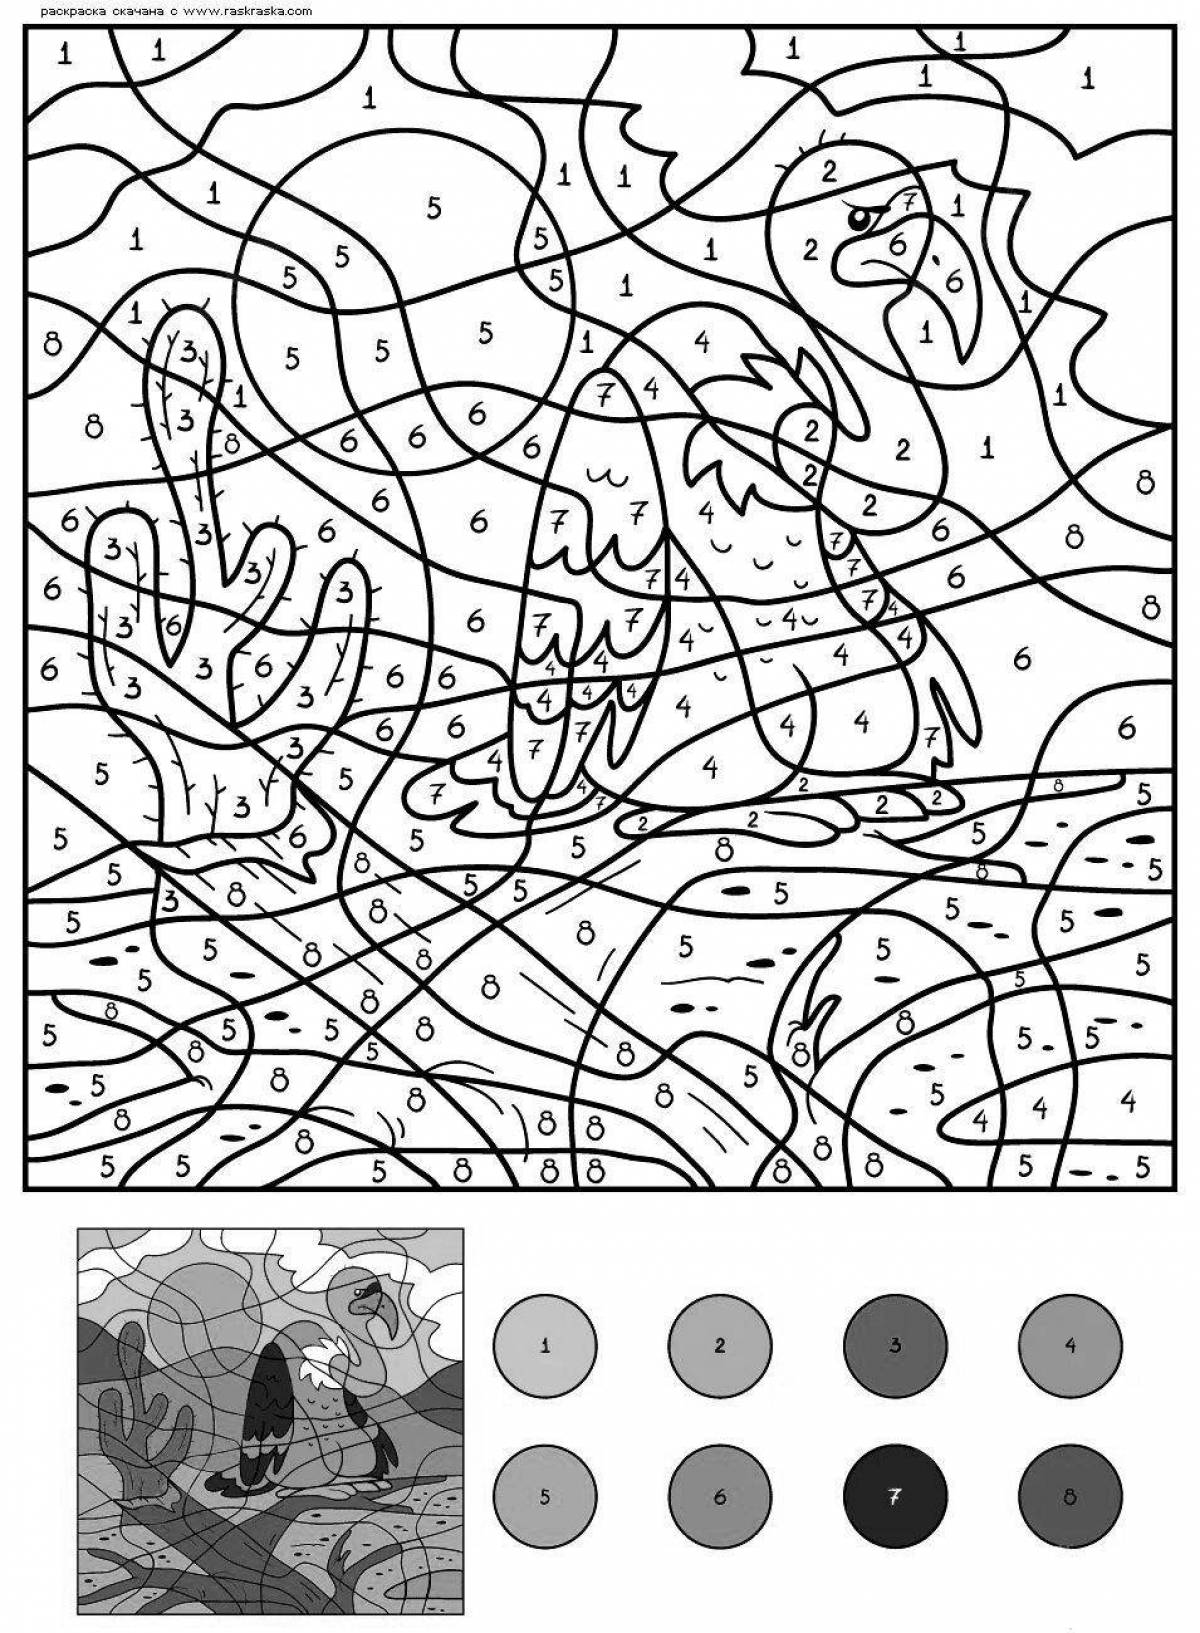 Charm coloring page by numbers